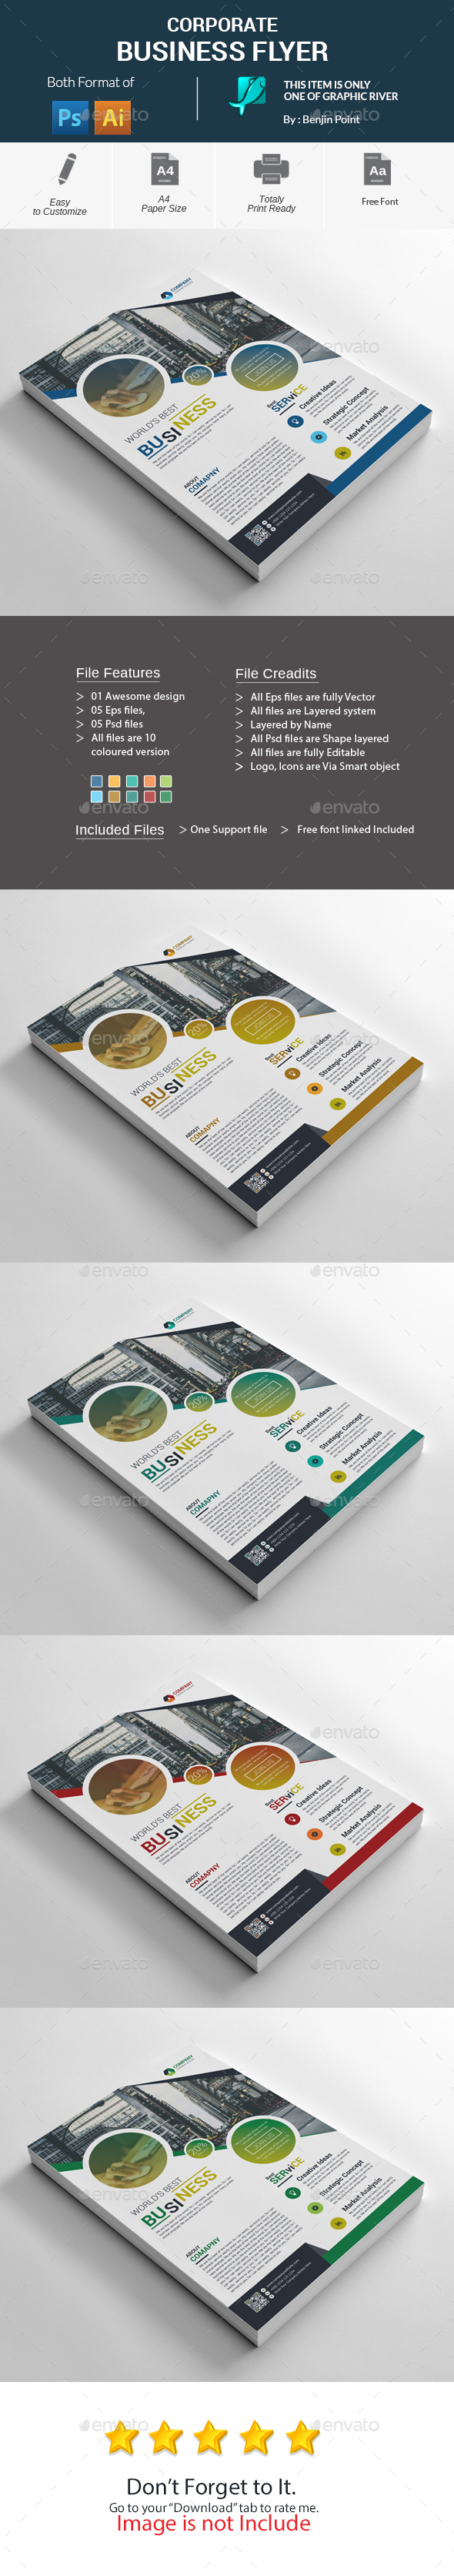 GraphicRiver Corporate Business Flyer 20889042